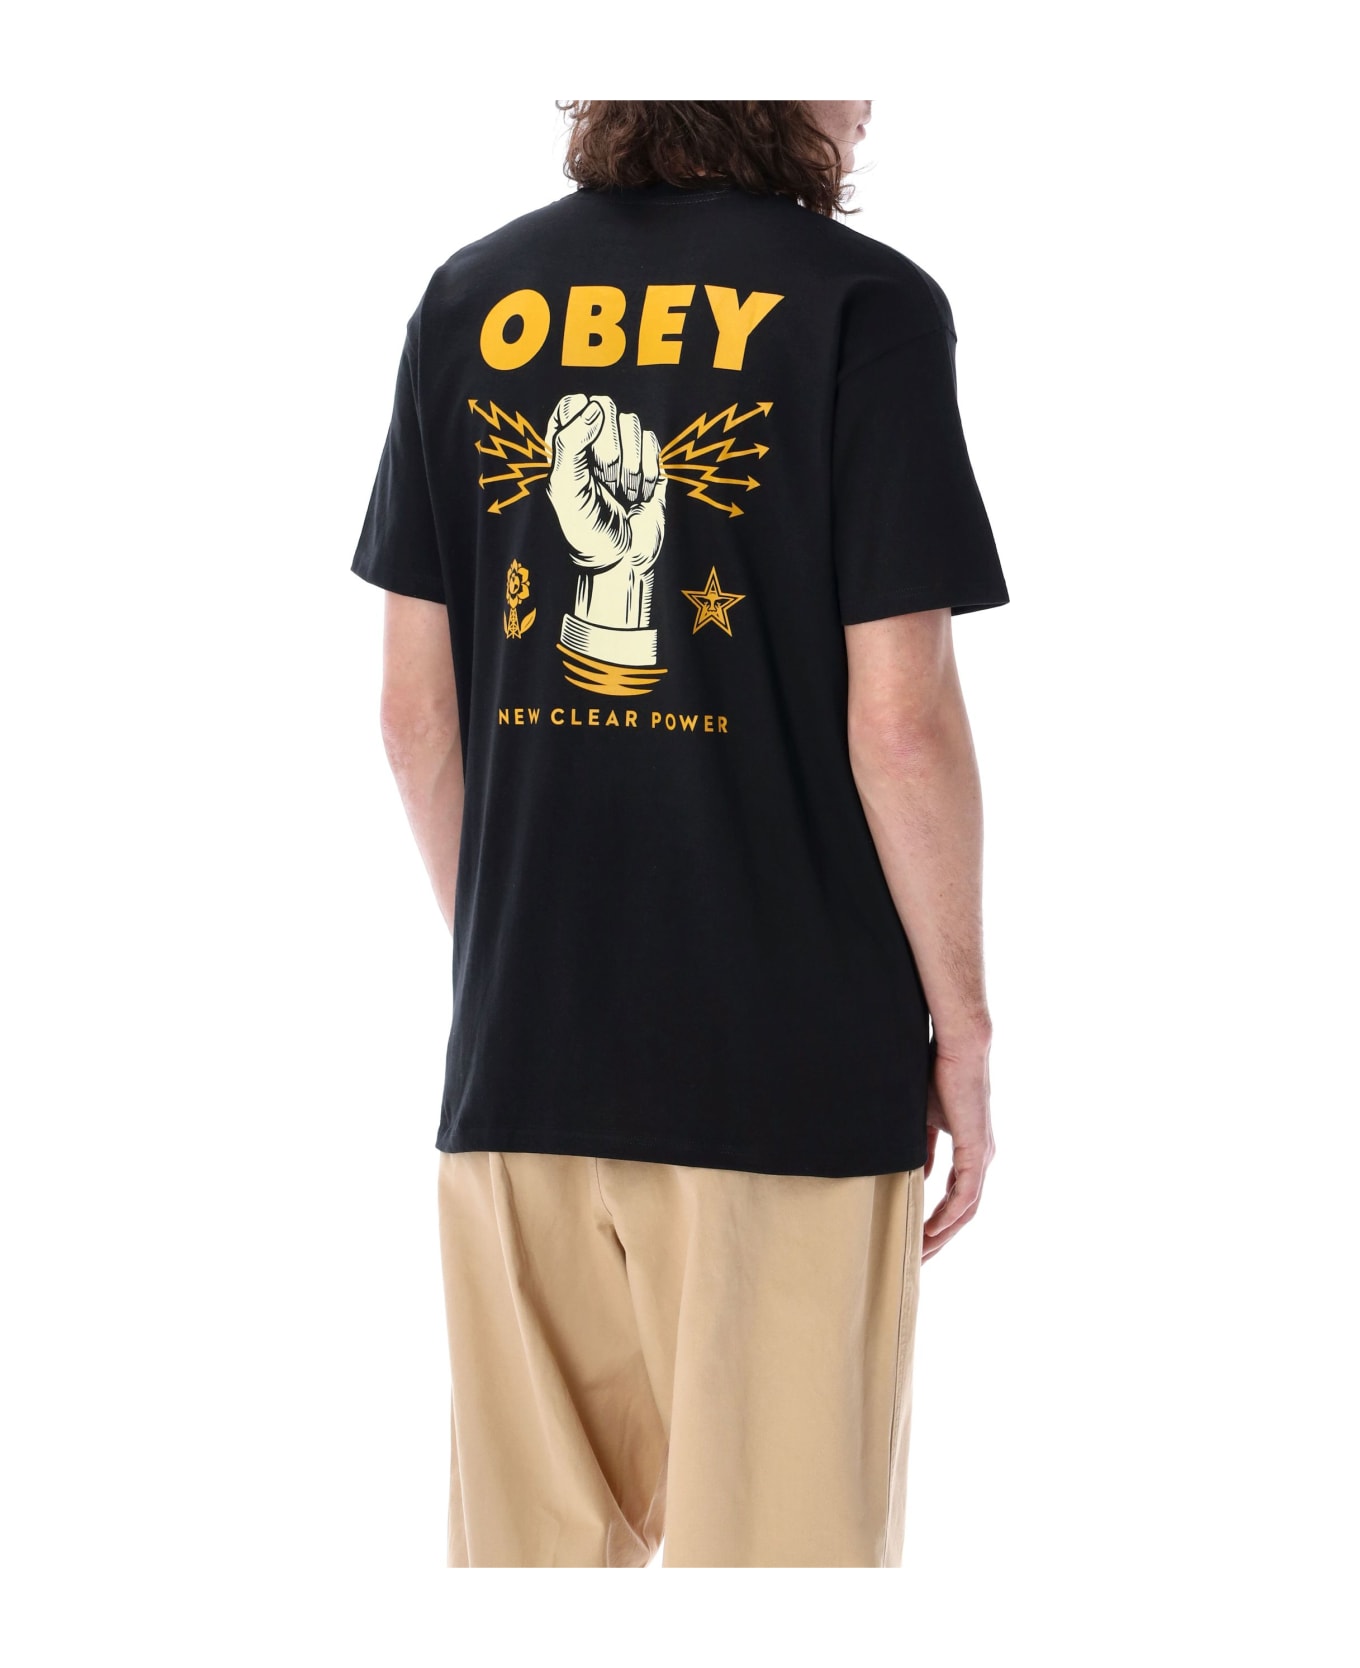 Obey New Clear Power T-shirt - BLACK